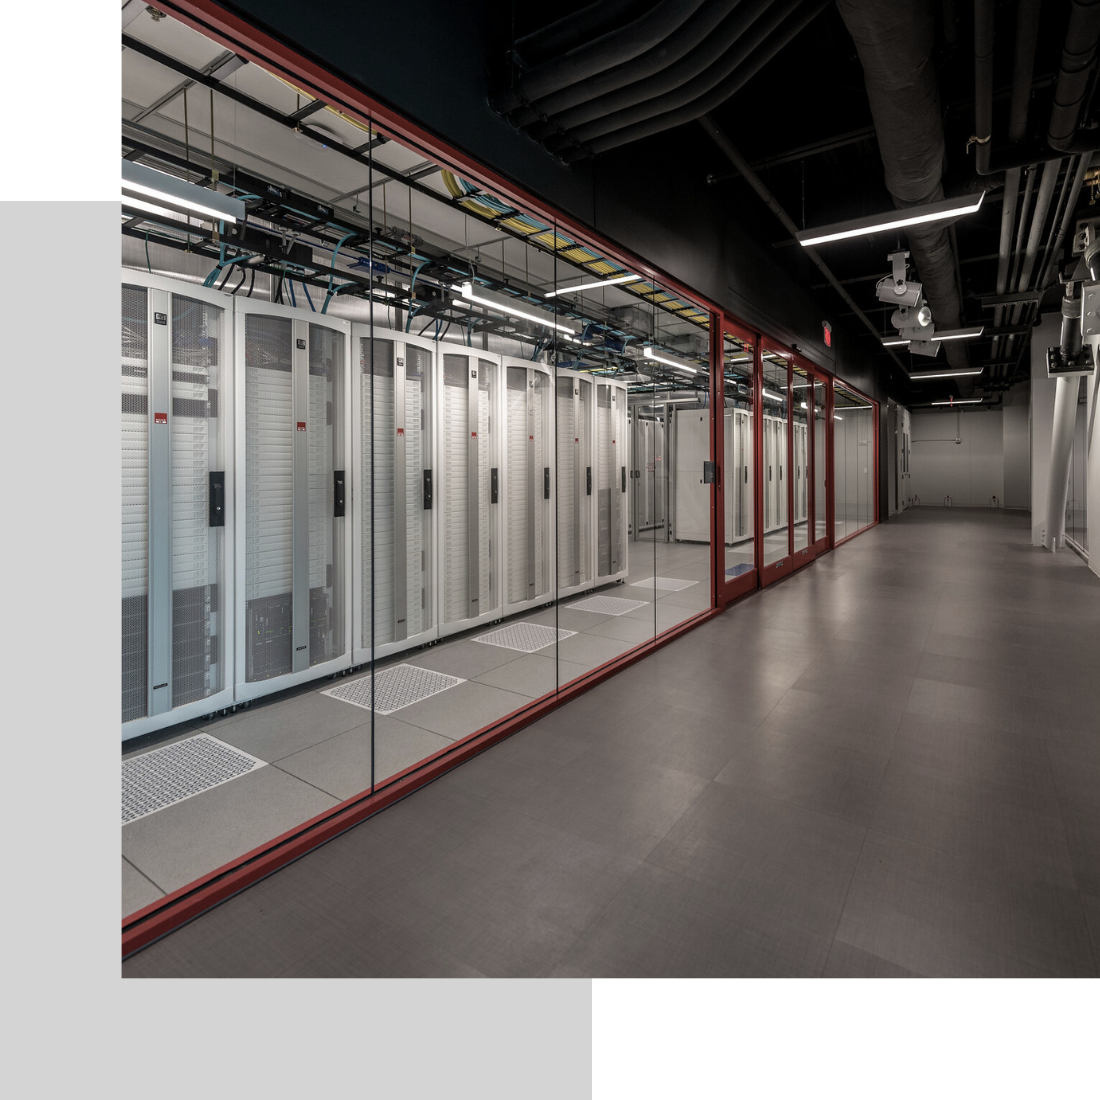 data center server room behind glass wall down hall in perspective